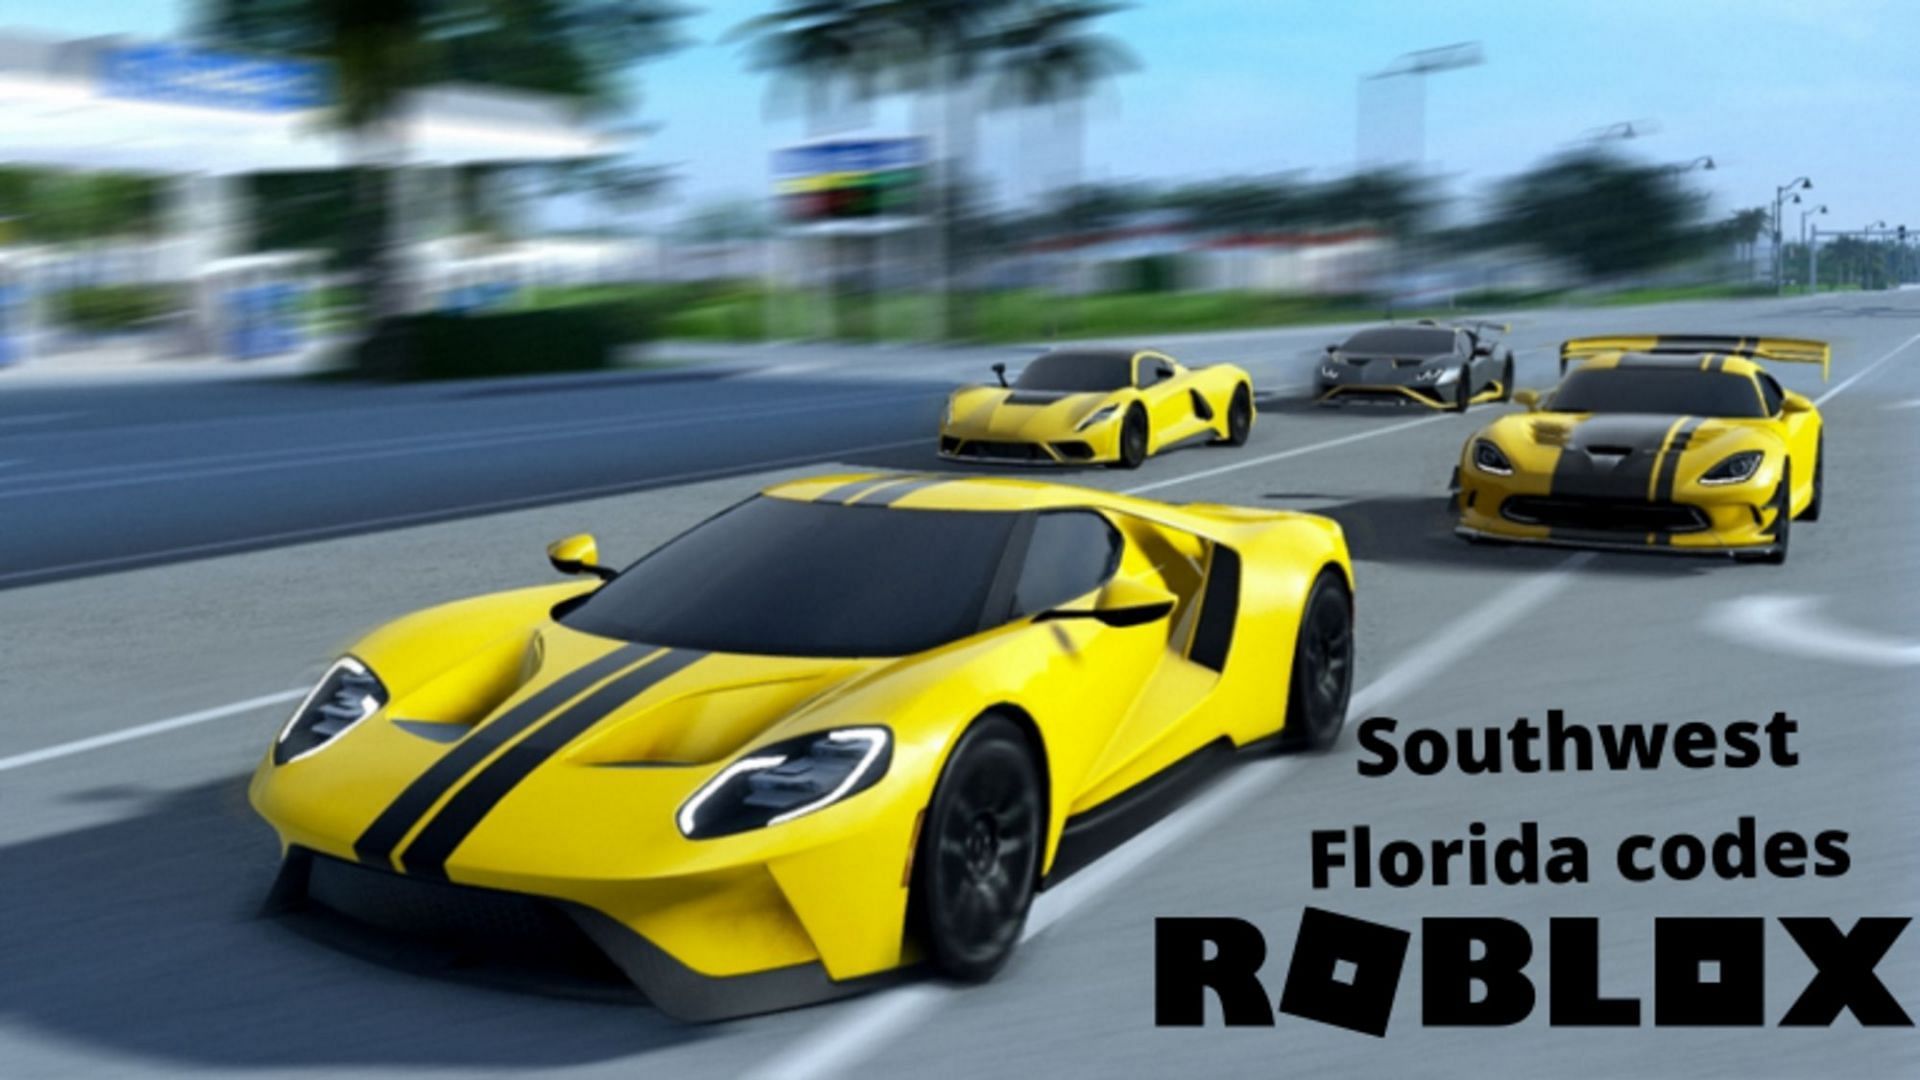 Roblox Southwest Florida codes (May 2022) Free cash